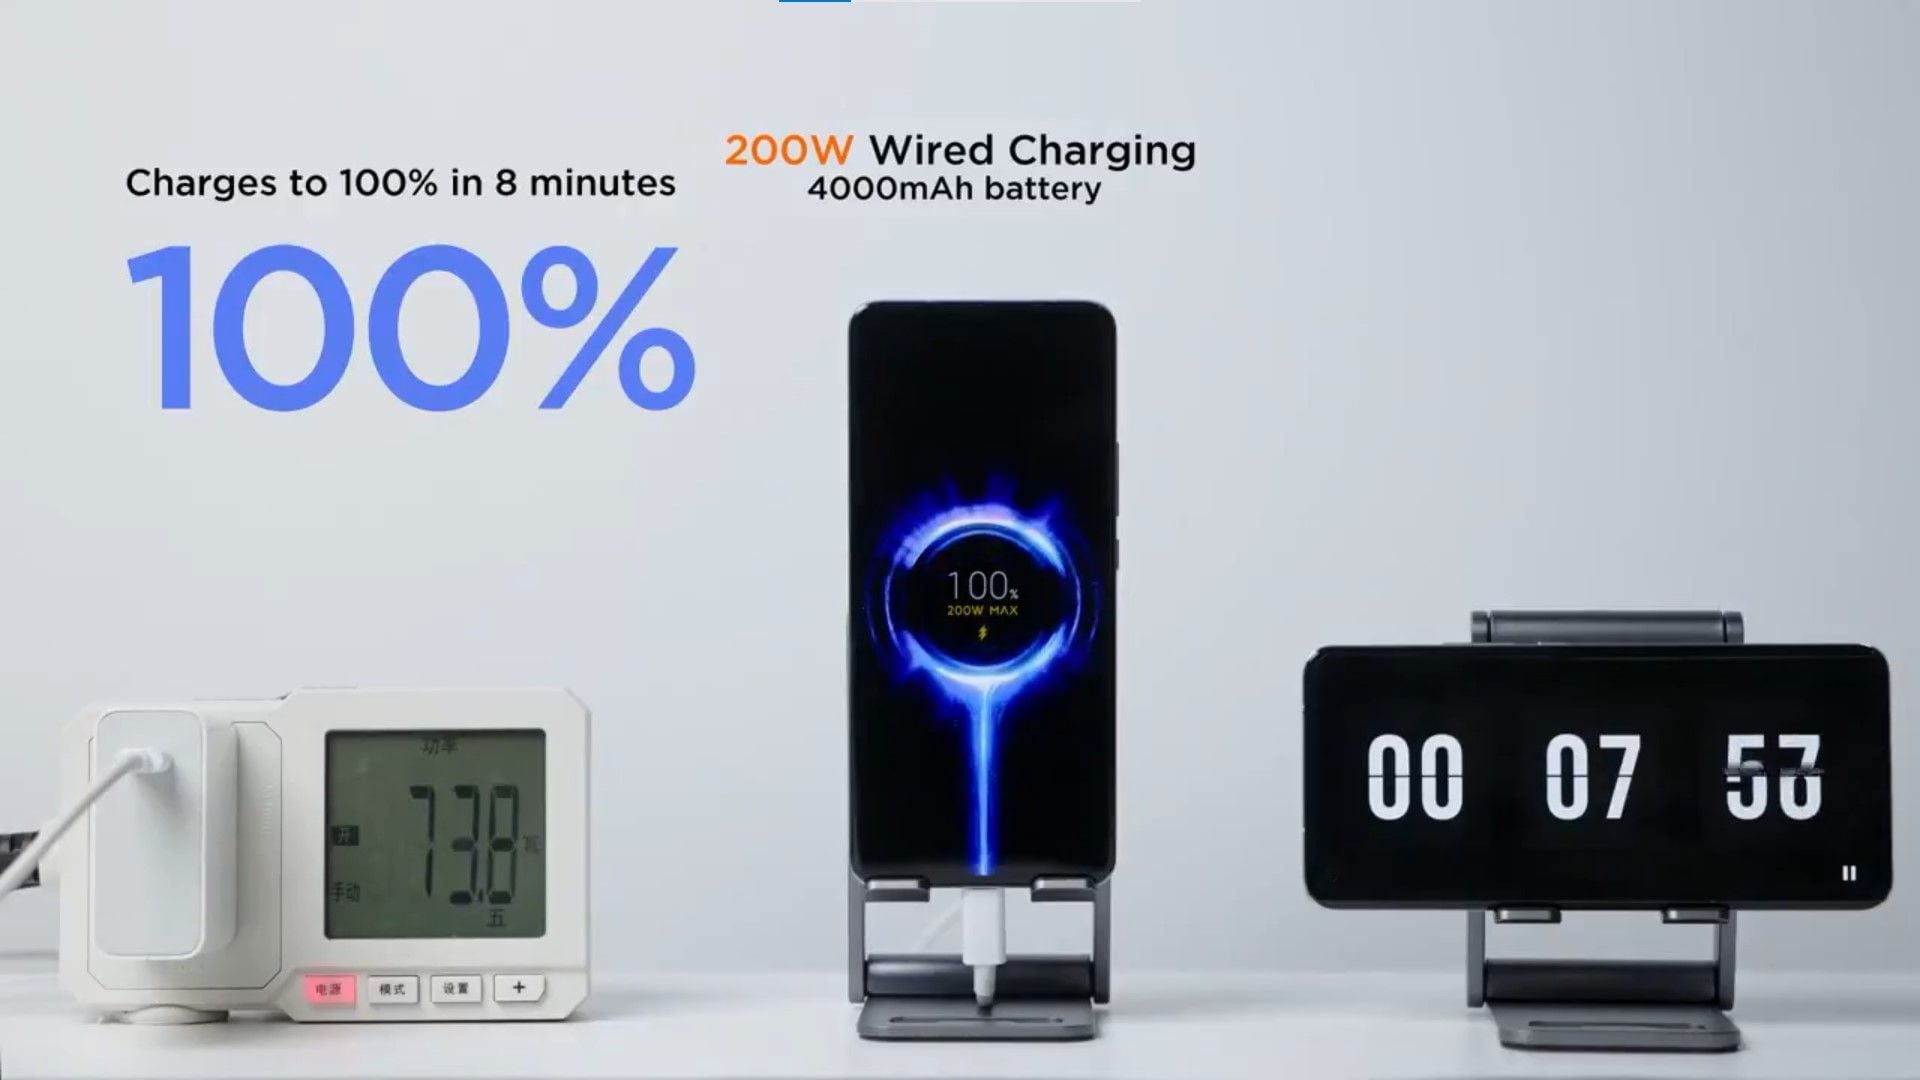 Xiaomi is the first OEM to offer 200 W fast charging for a smartphone. Image: Xiaomi